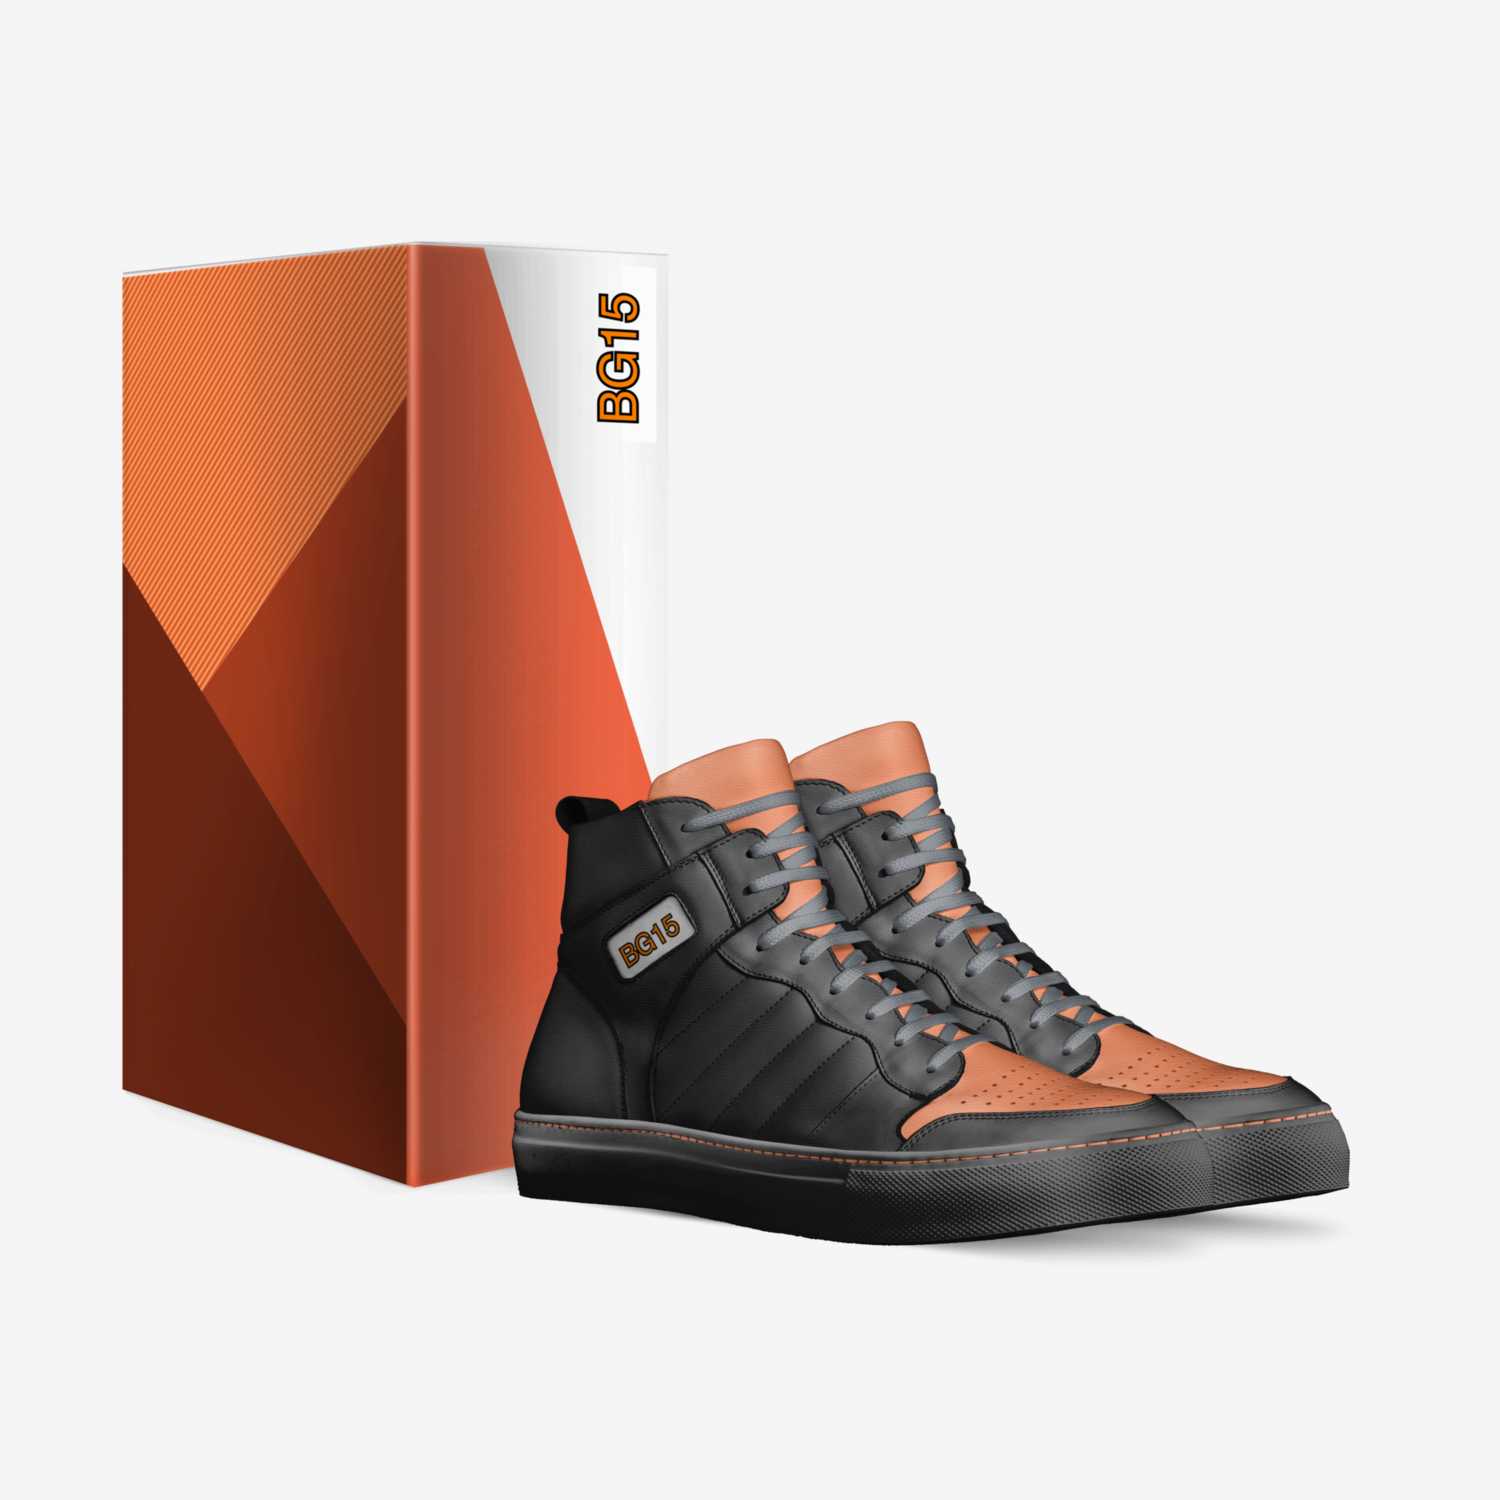 BG15 custom made in Italy shoes by Brendan Gray | Box view